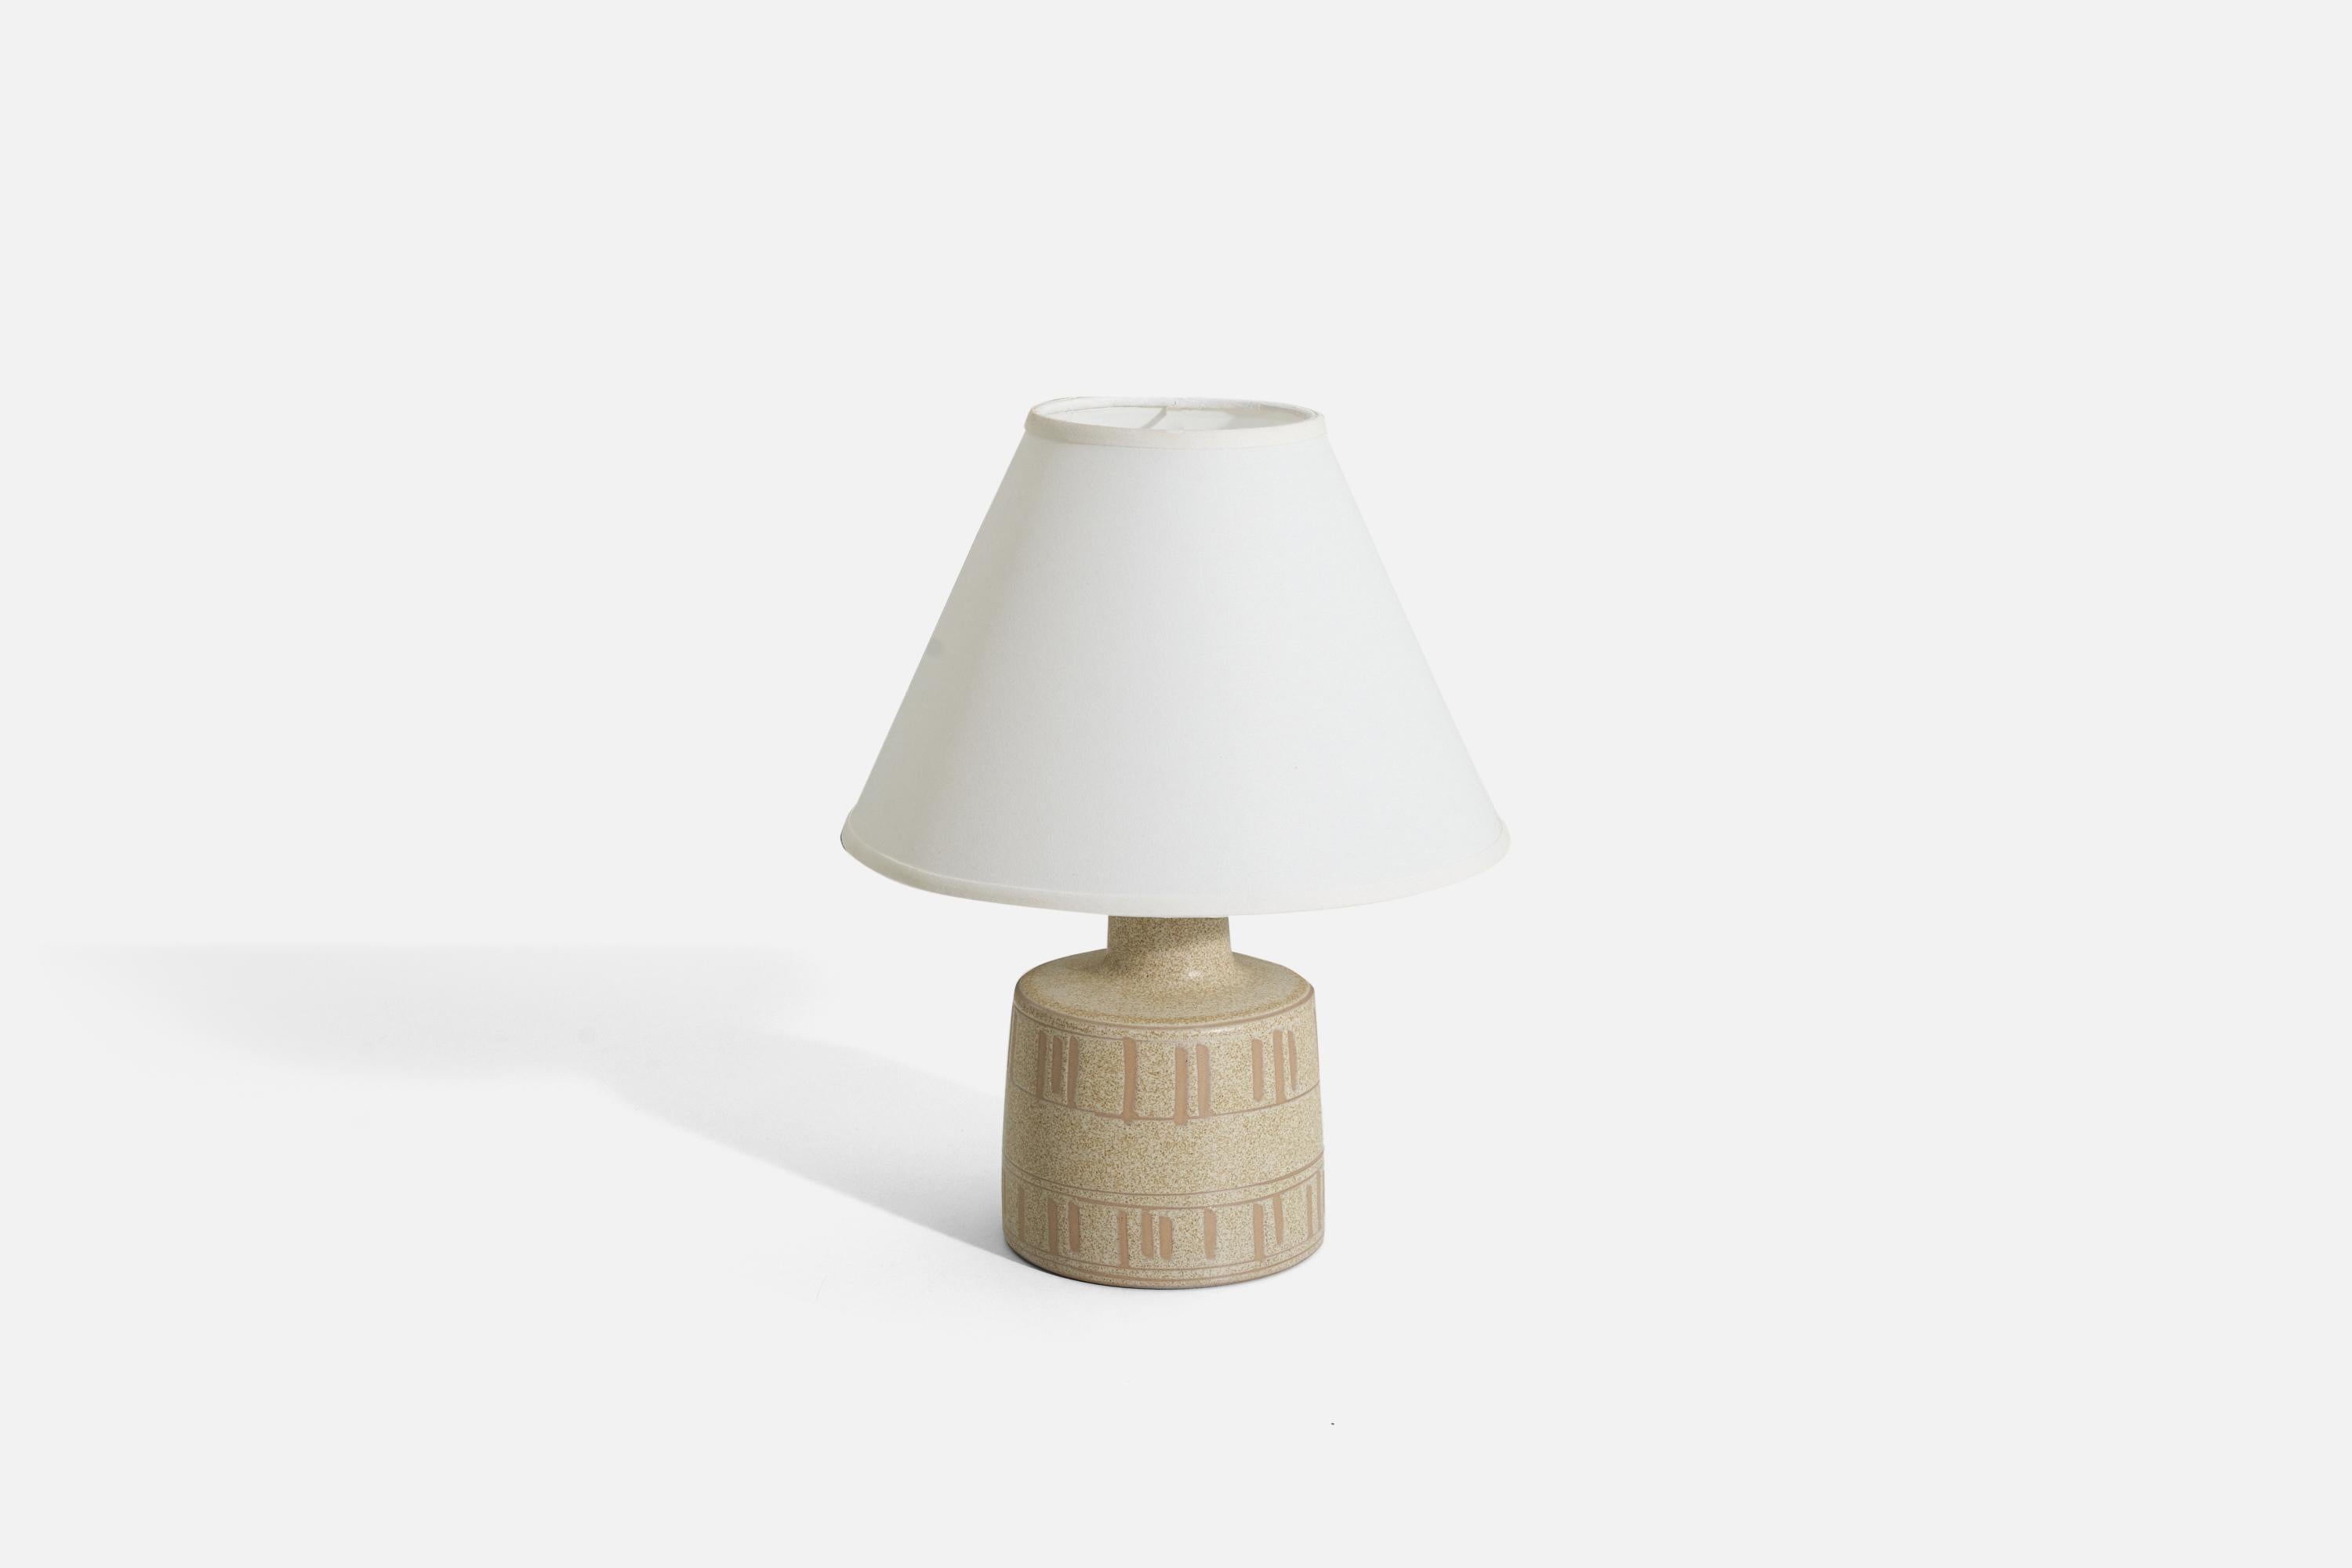 Jane & Gordon Martz, Table Lamp, White-Ceramic, Marshall Studios, 1960s In Good Condition For Sale In High Point, NC